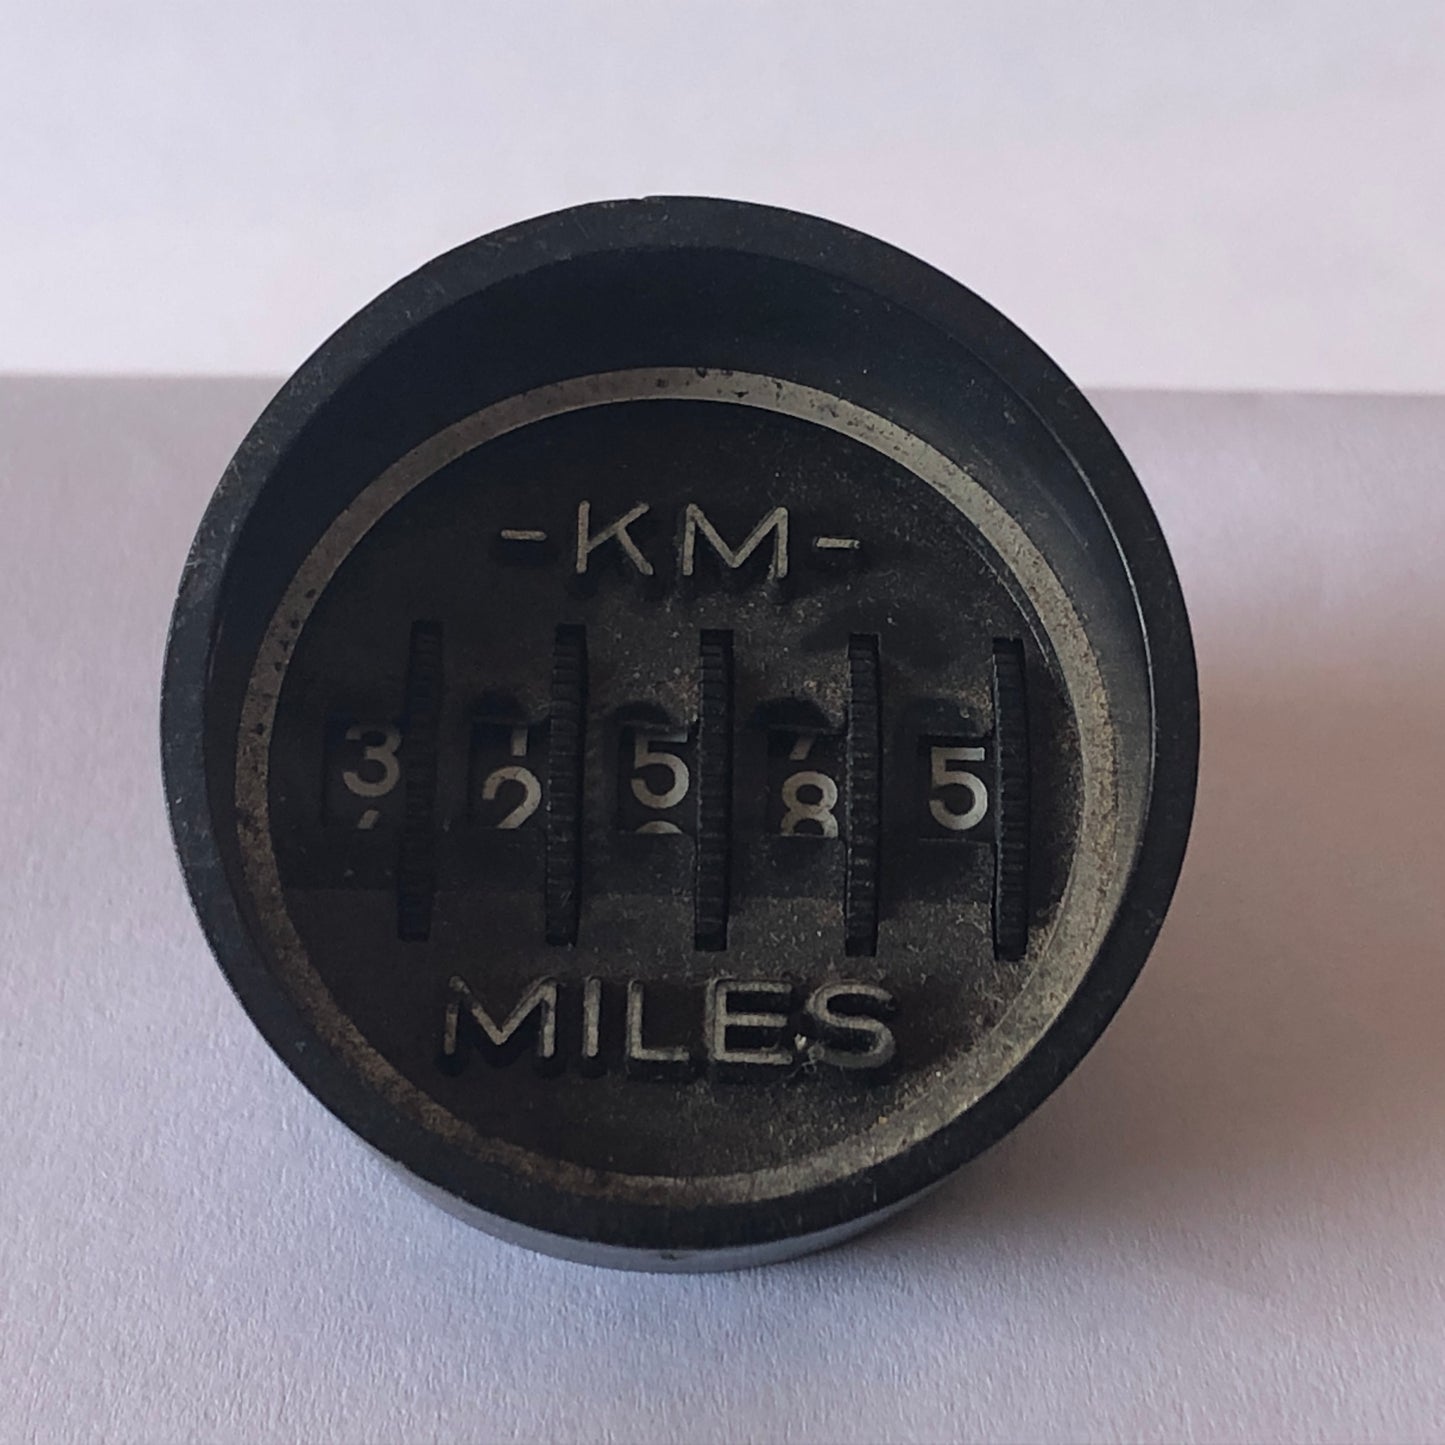 Automobilia, Vintage Manual Km and Mile Counter with Magnet